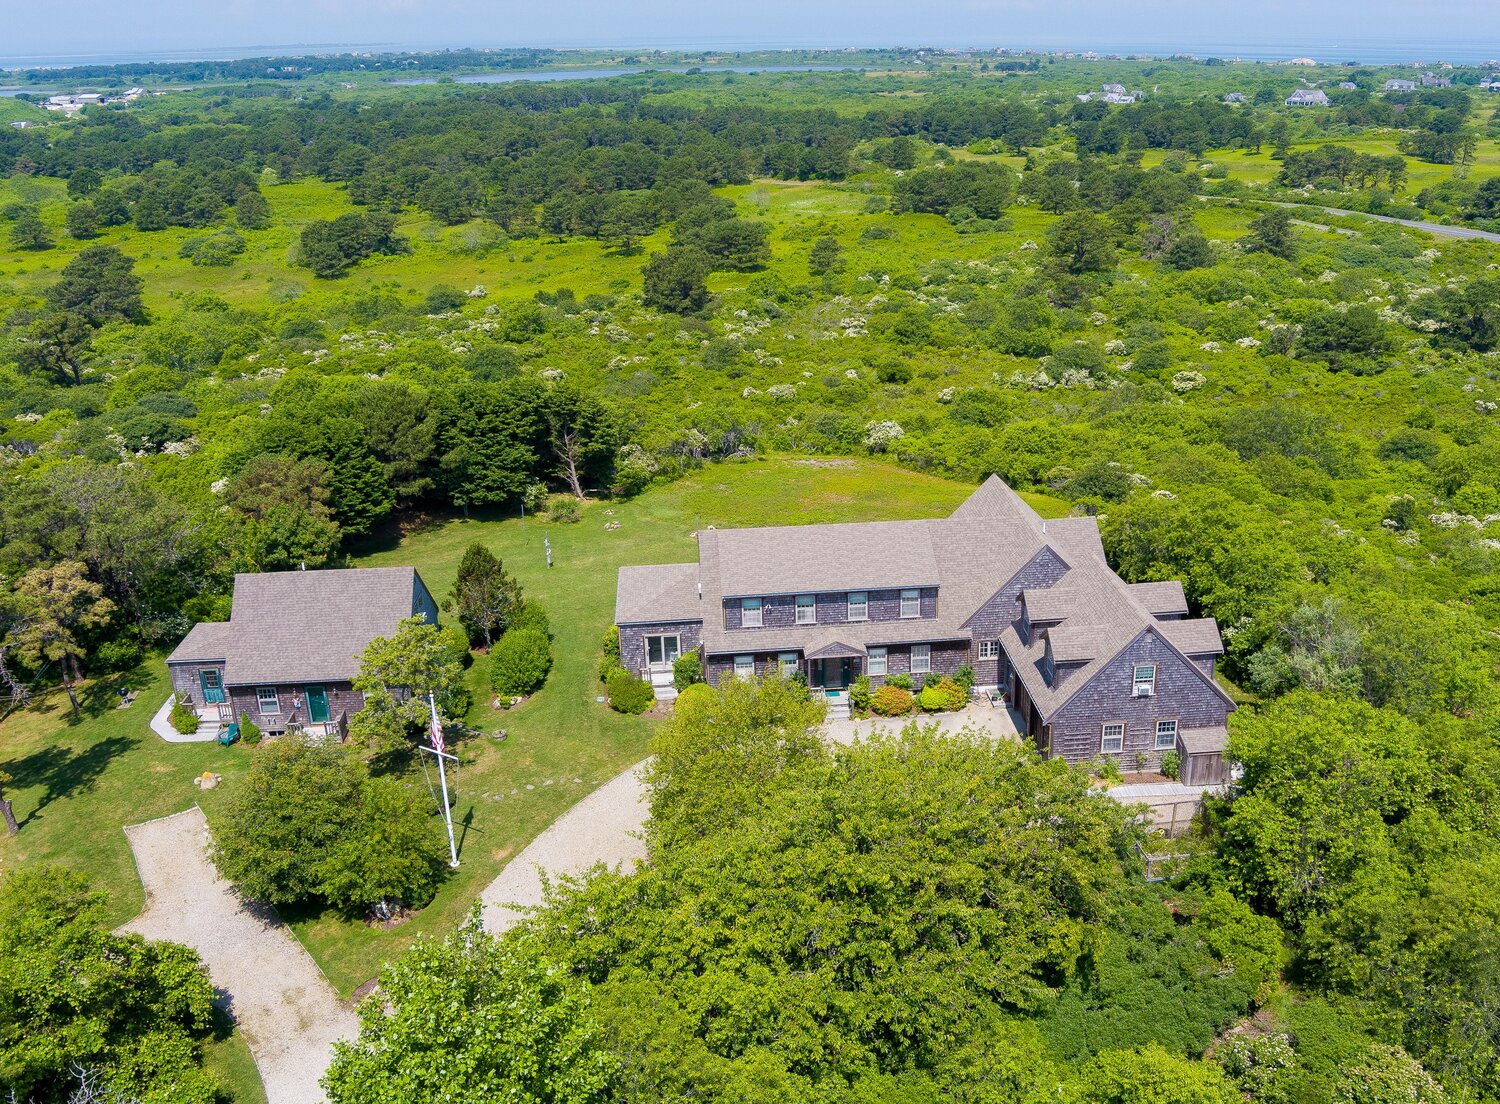 Boasting views of the north shore, picturesque sunsets and crystal-clear skies on 2.7 acres of land, this seven-bedroom, five-and-a-half-bathroom Madaket Road property includes a main house, attached two-car garage and a separate cottage.